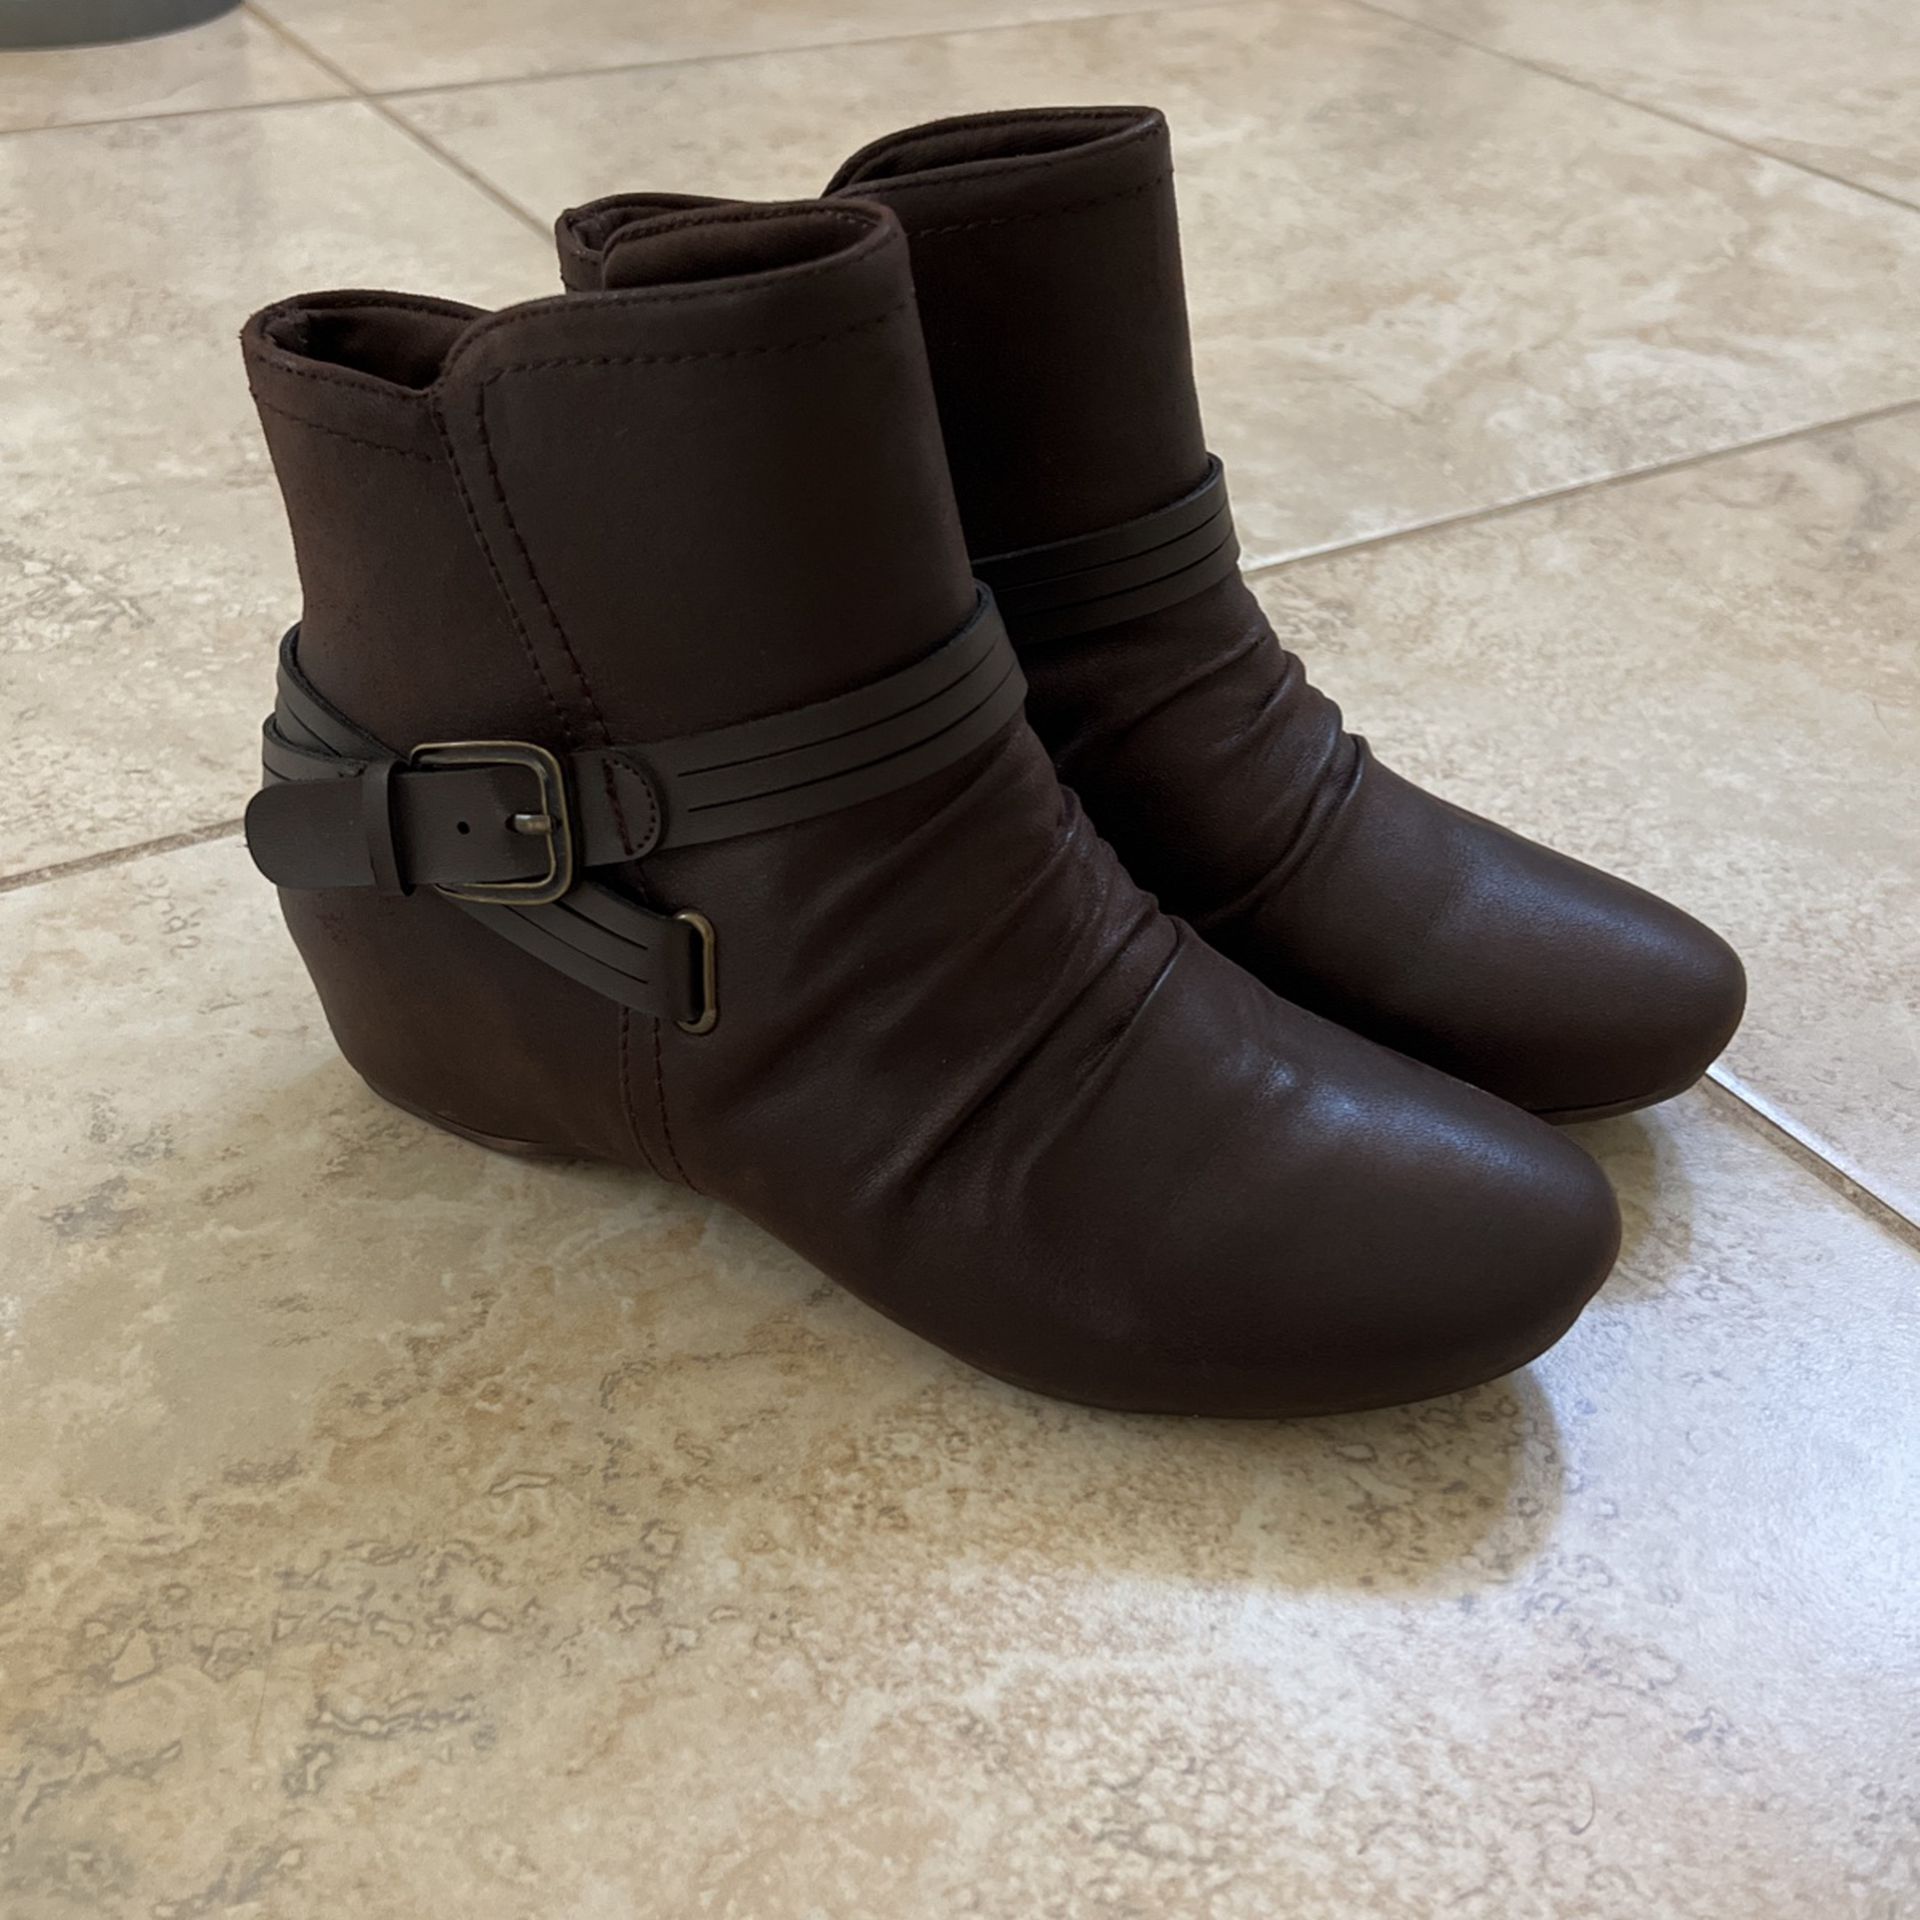 Boots Size 5.5 New